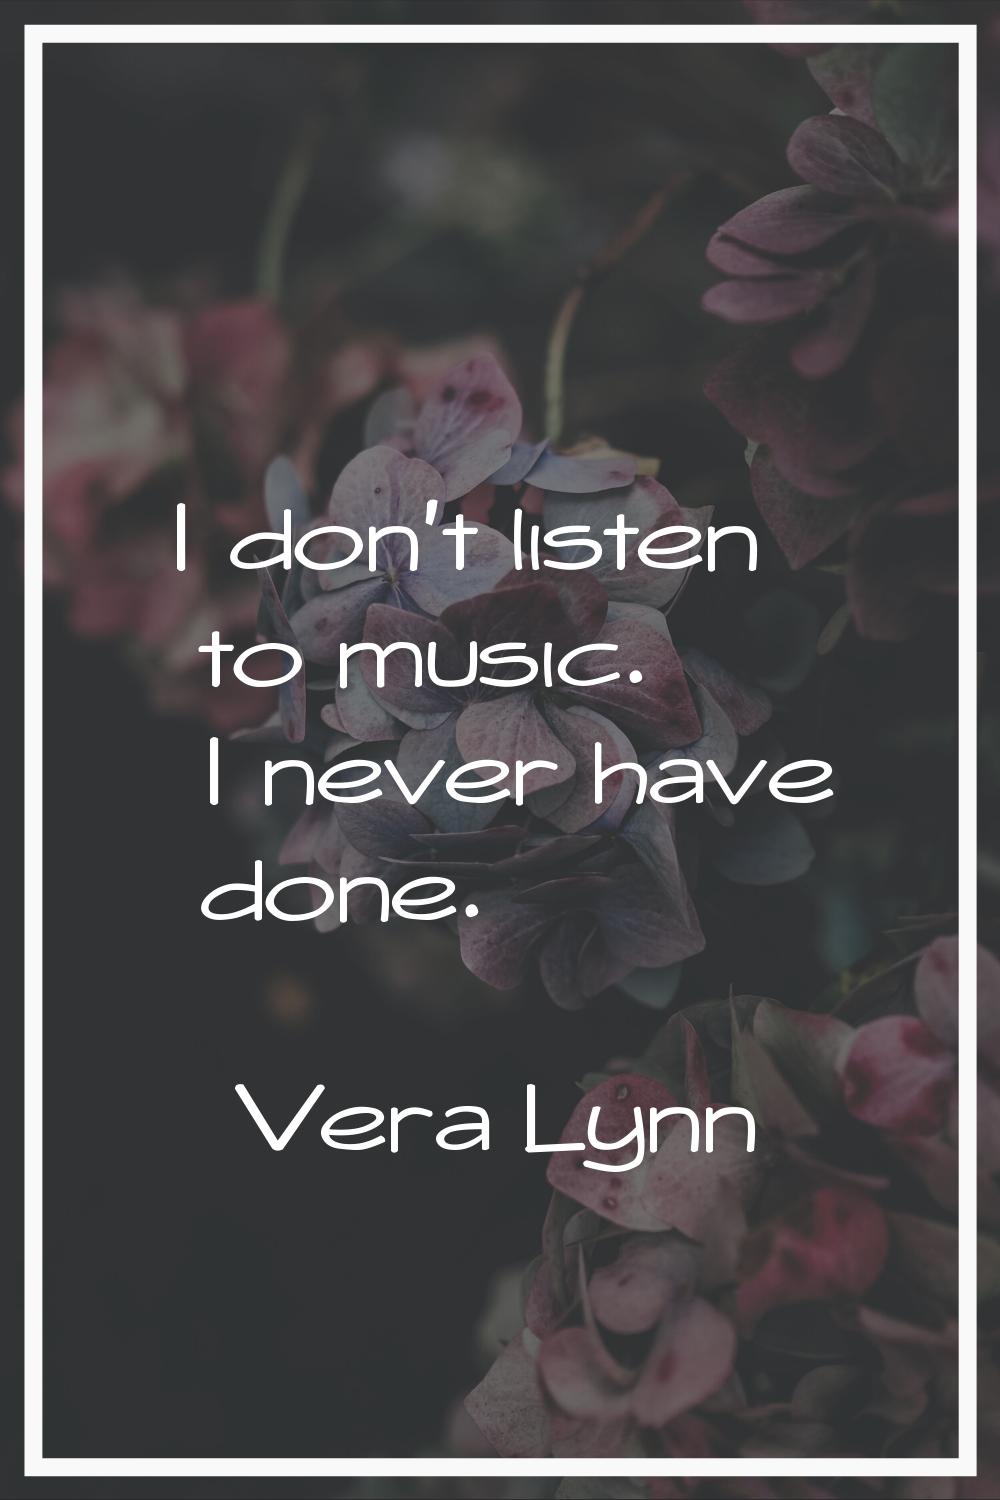 I don't listen to music. I never have done.